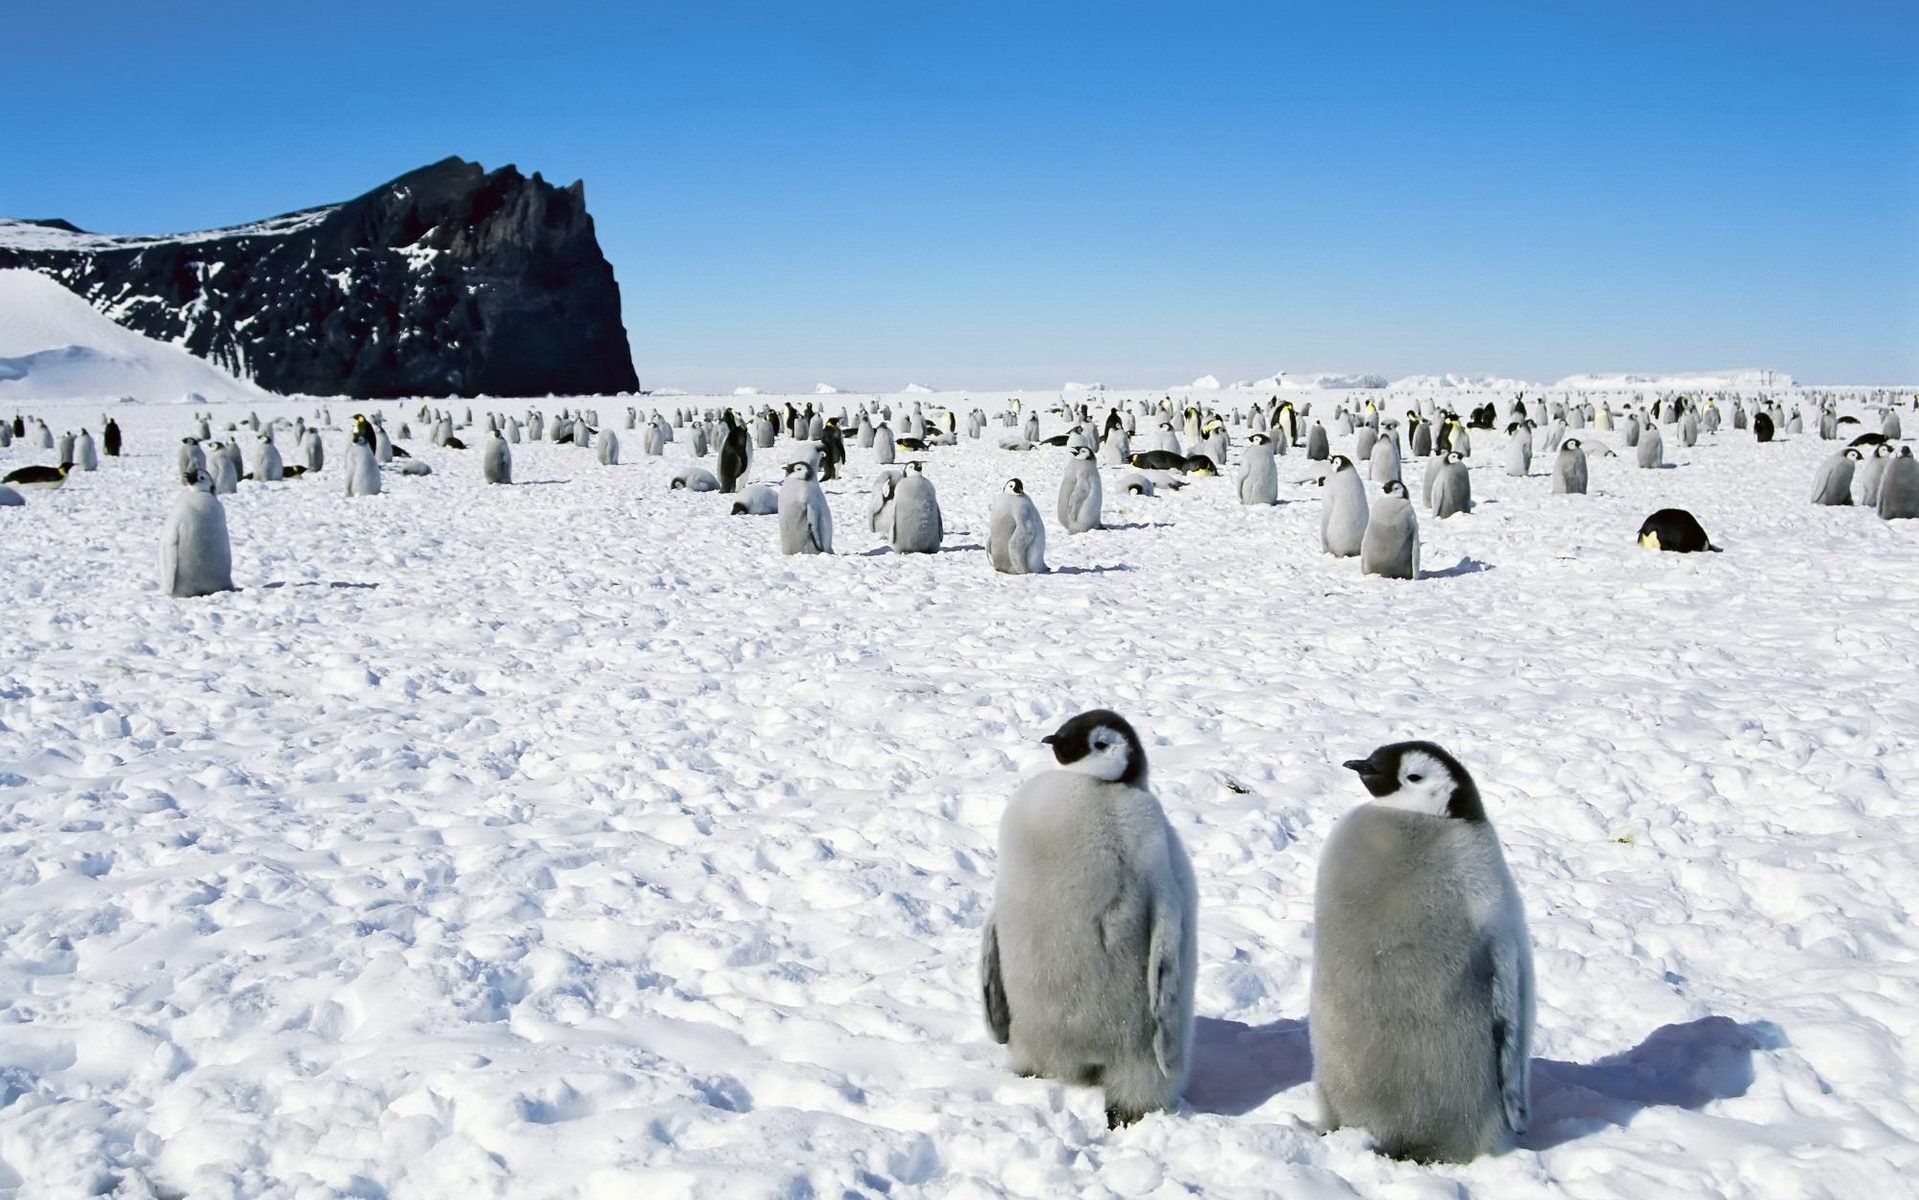 Penguin Facts And Pictures Take A Quick Break Visit Our